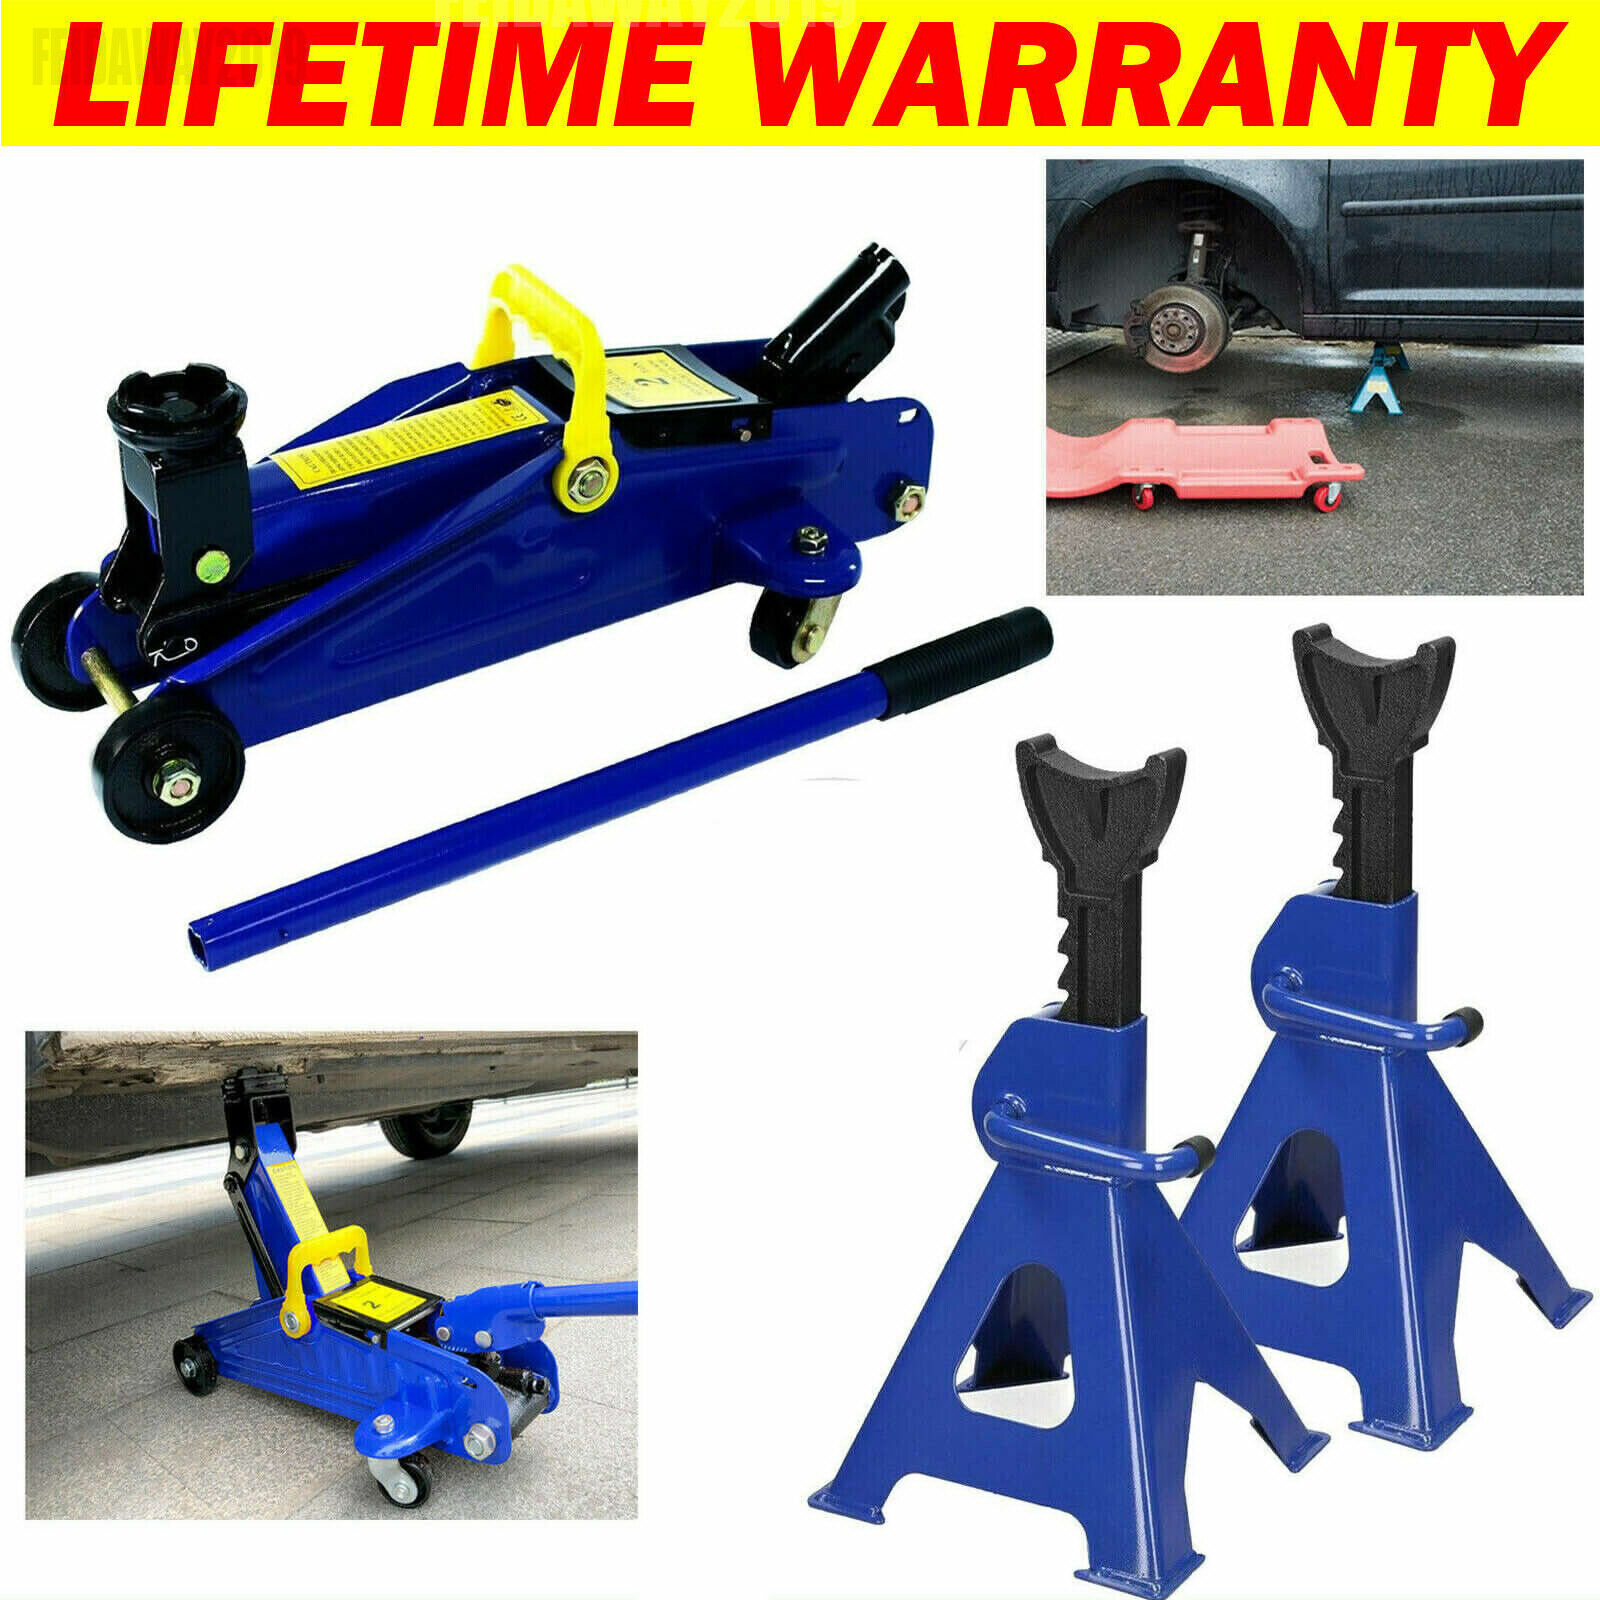 2 Ton Tonne Hydraulic Low Profile Floor Trolley Jack + 3 Ton Jack Stand Lifting